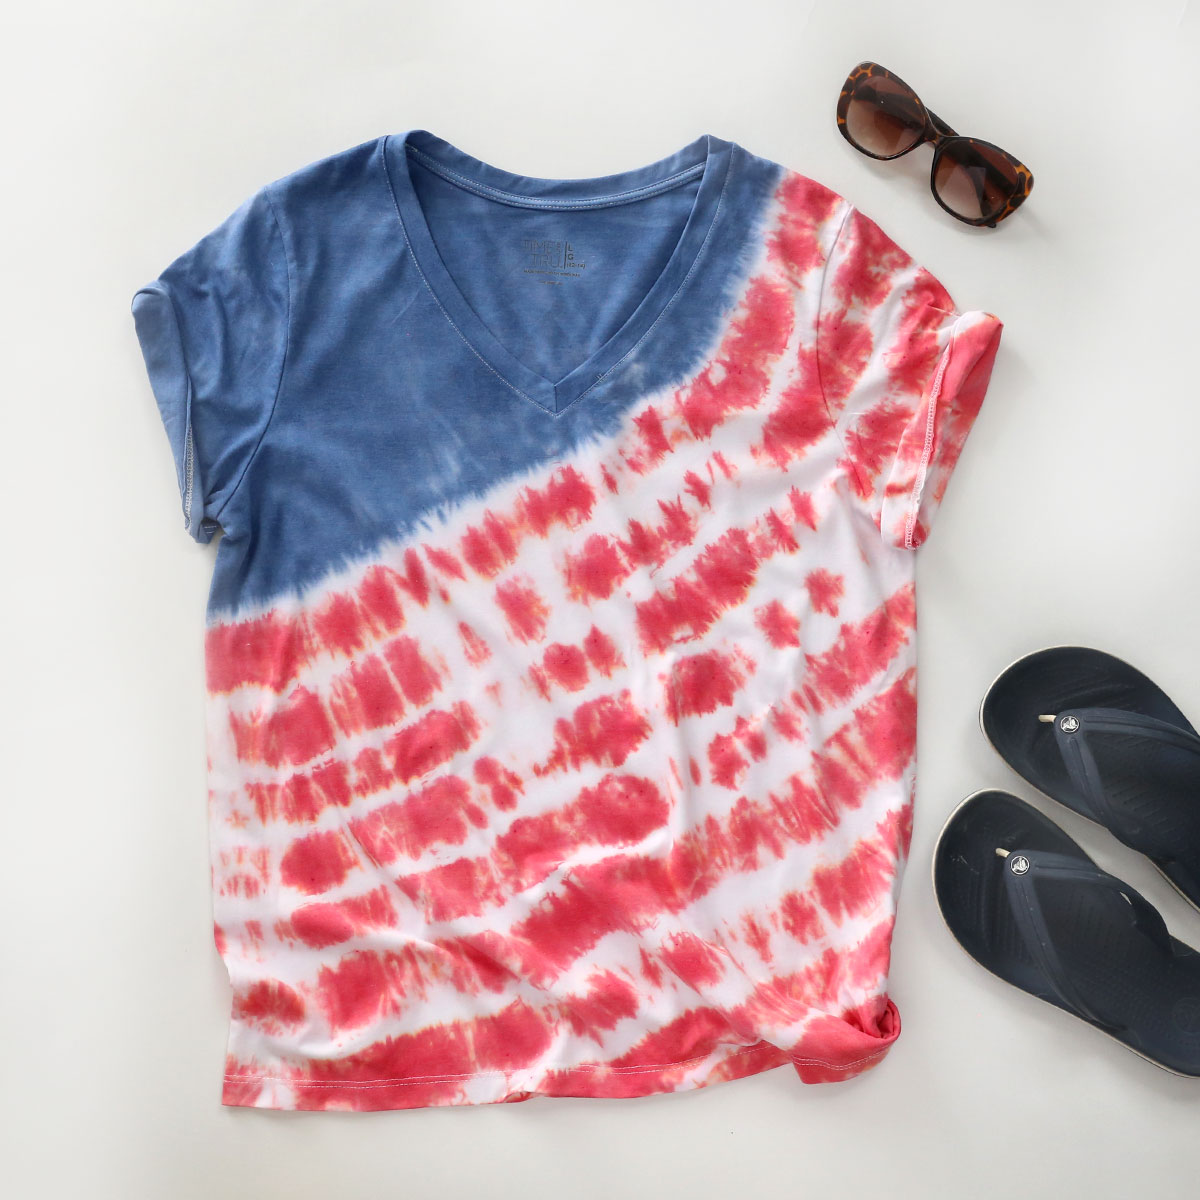 Red white and blue tie dye shirt for the Fourth of July